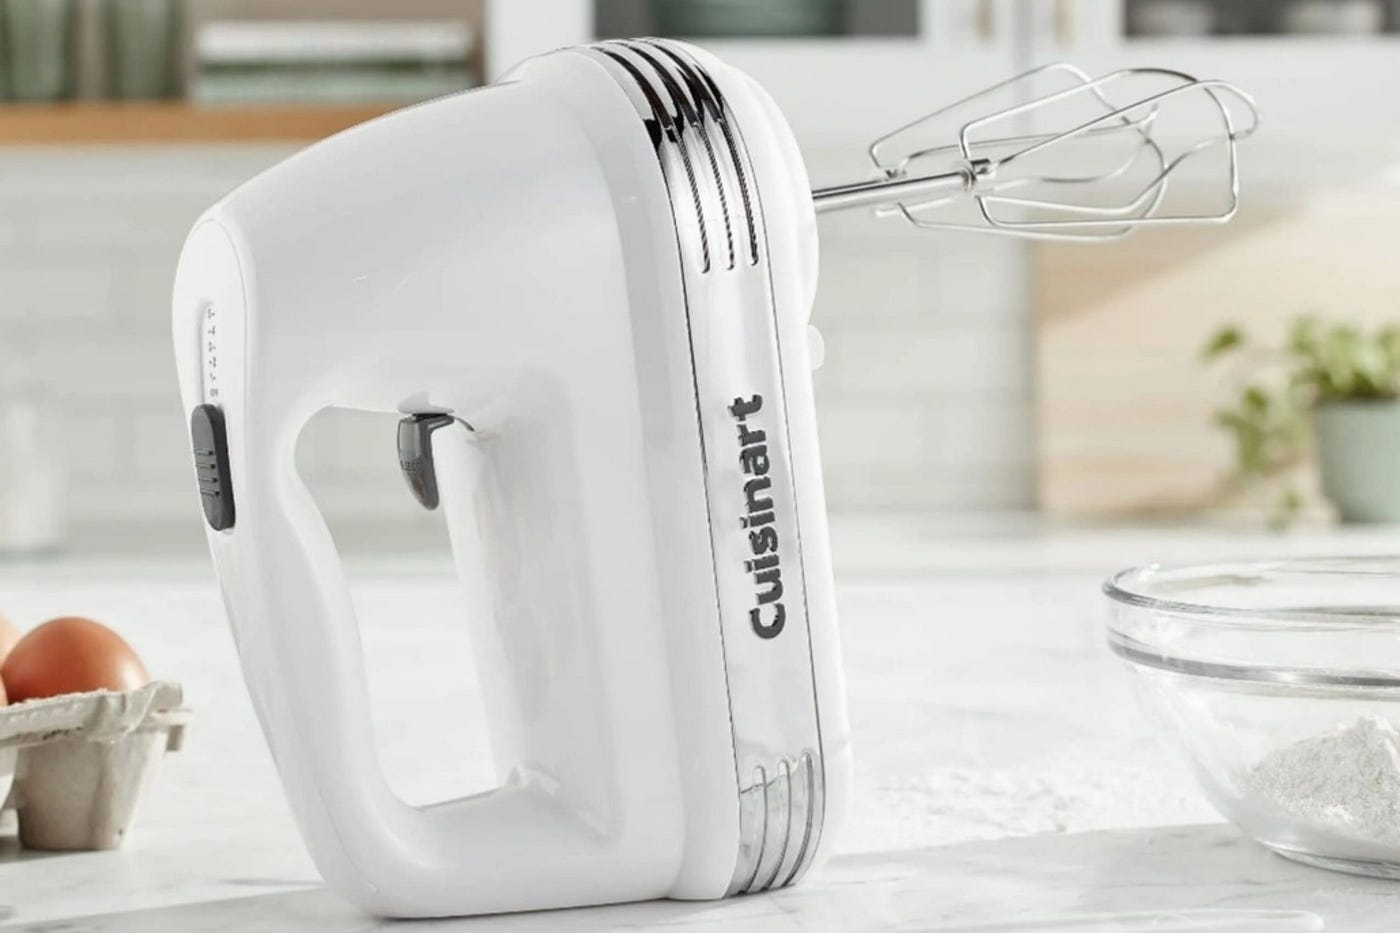 7 Uses for an Electric Hand Mixer